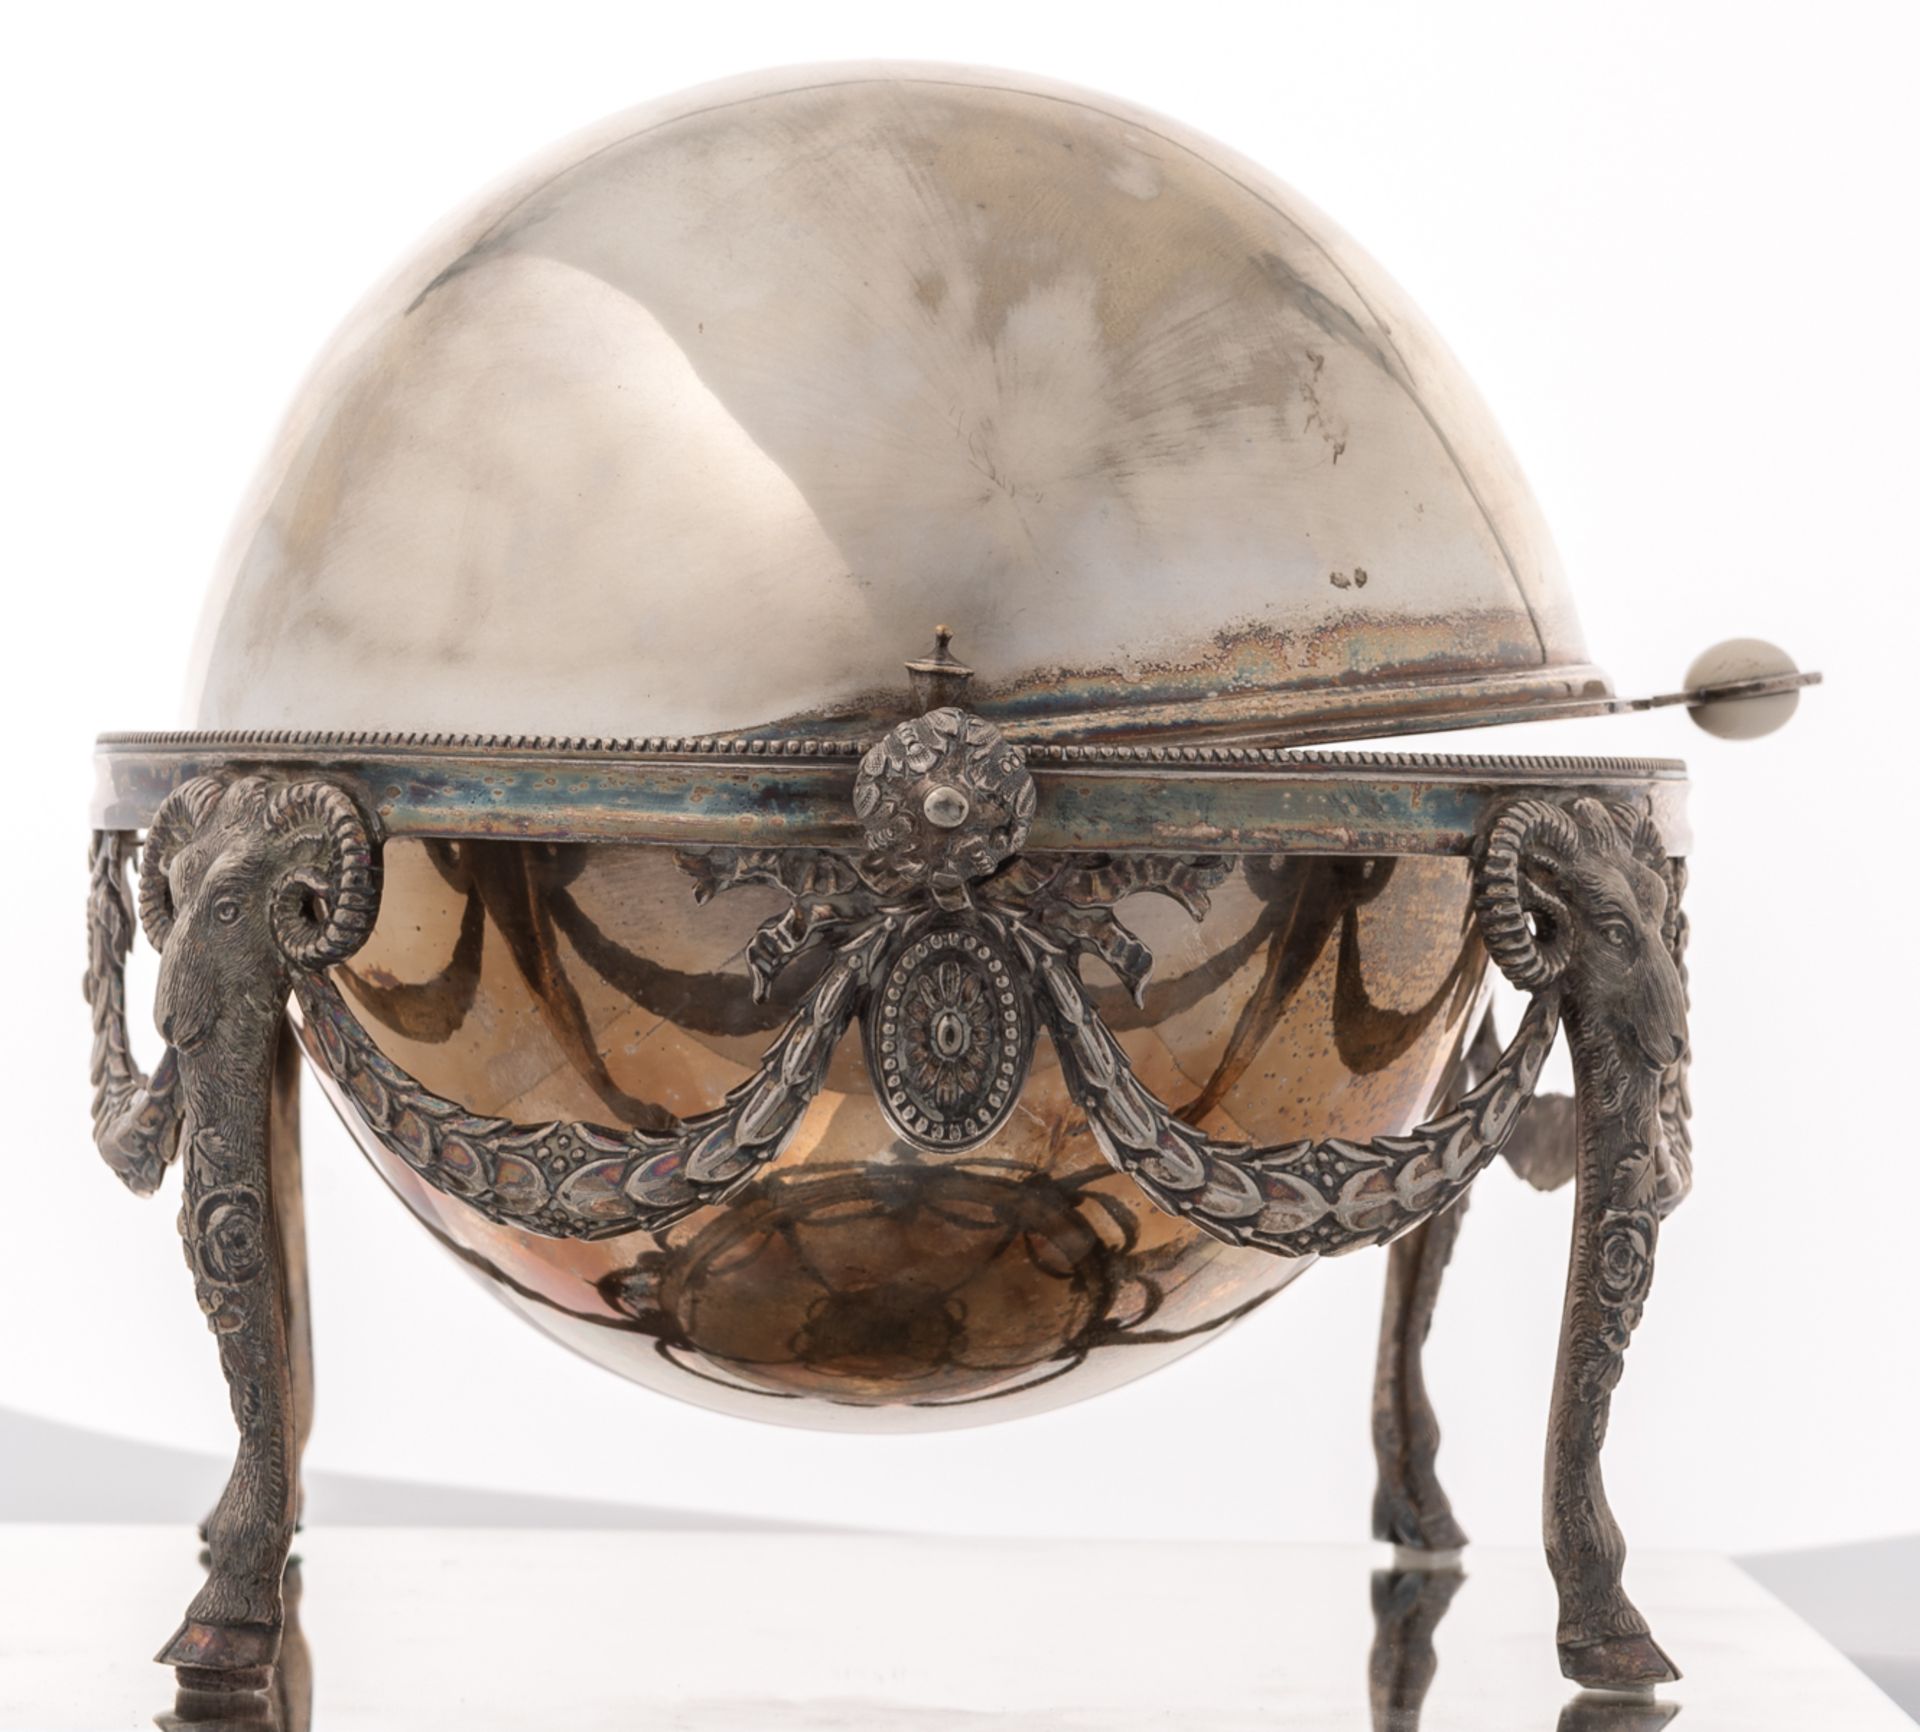 An English silver plated neoclassical covered caviar server with a bone handle, H 25 - W 38 - D 24 c - Bild 5 aus 10